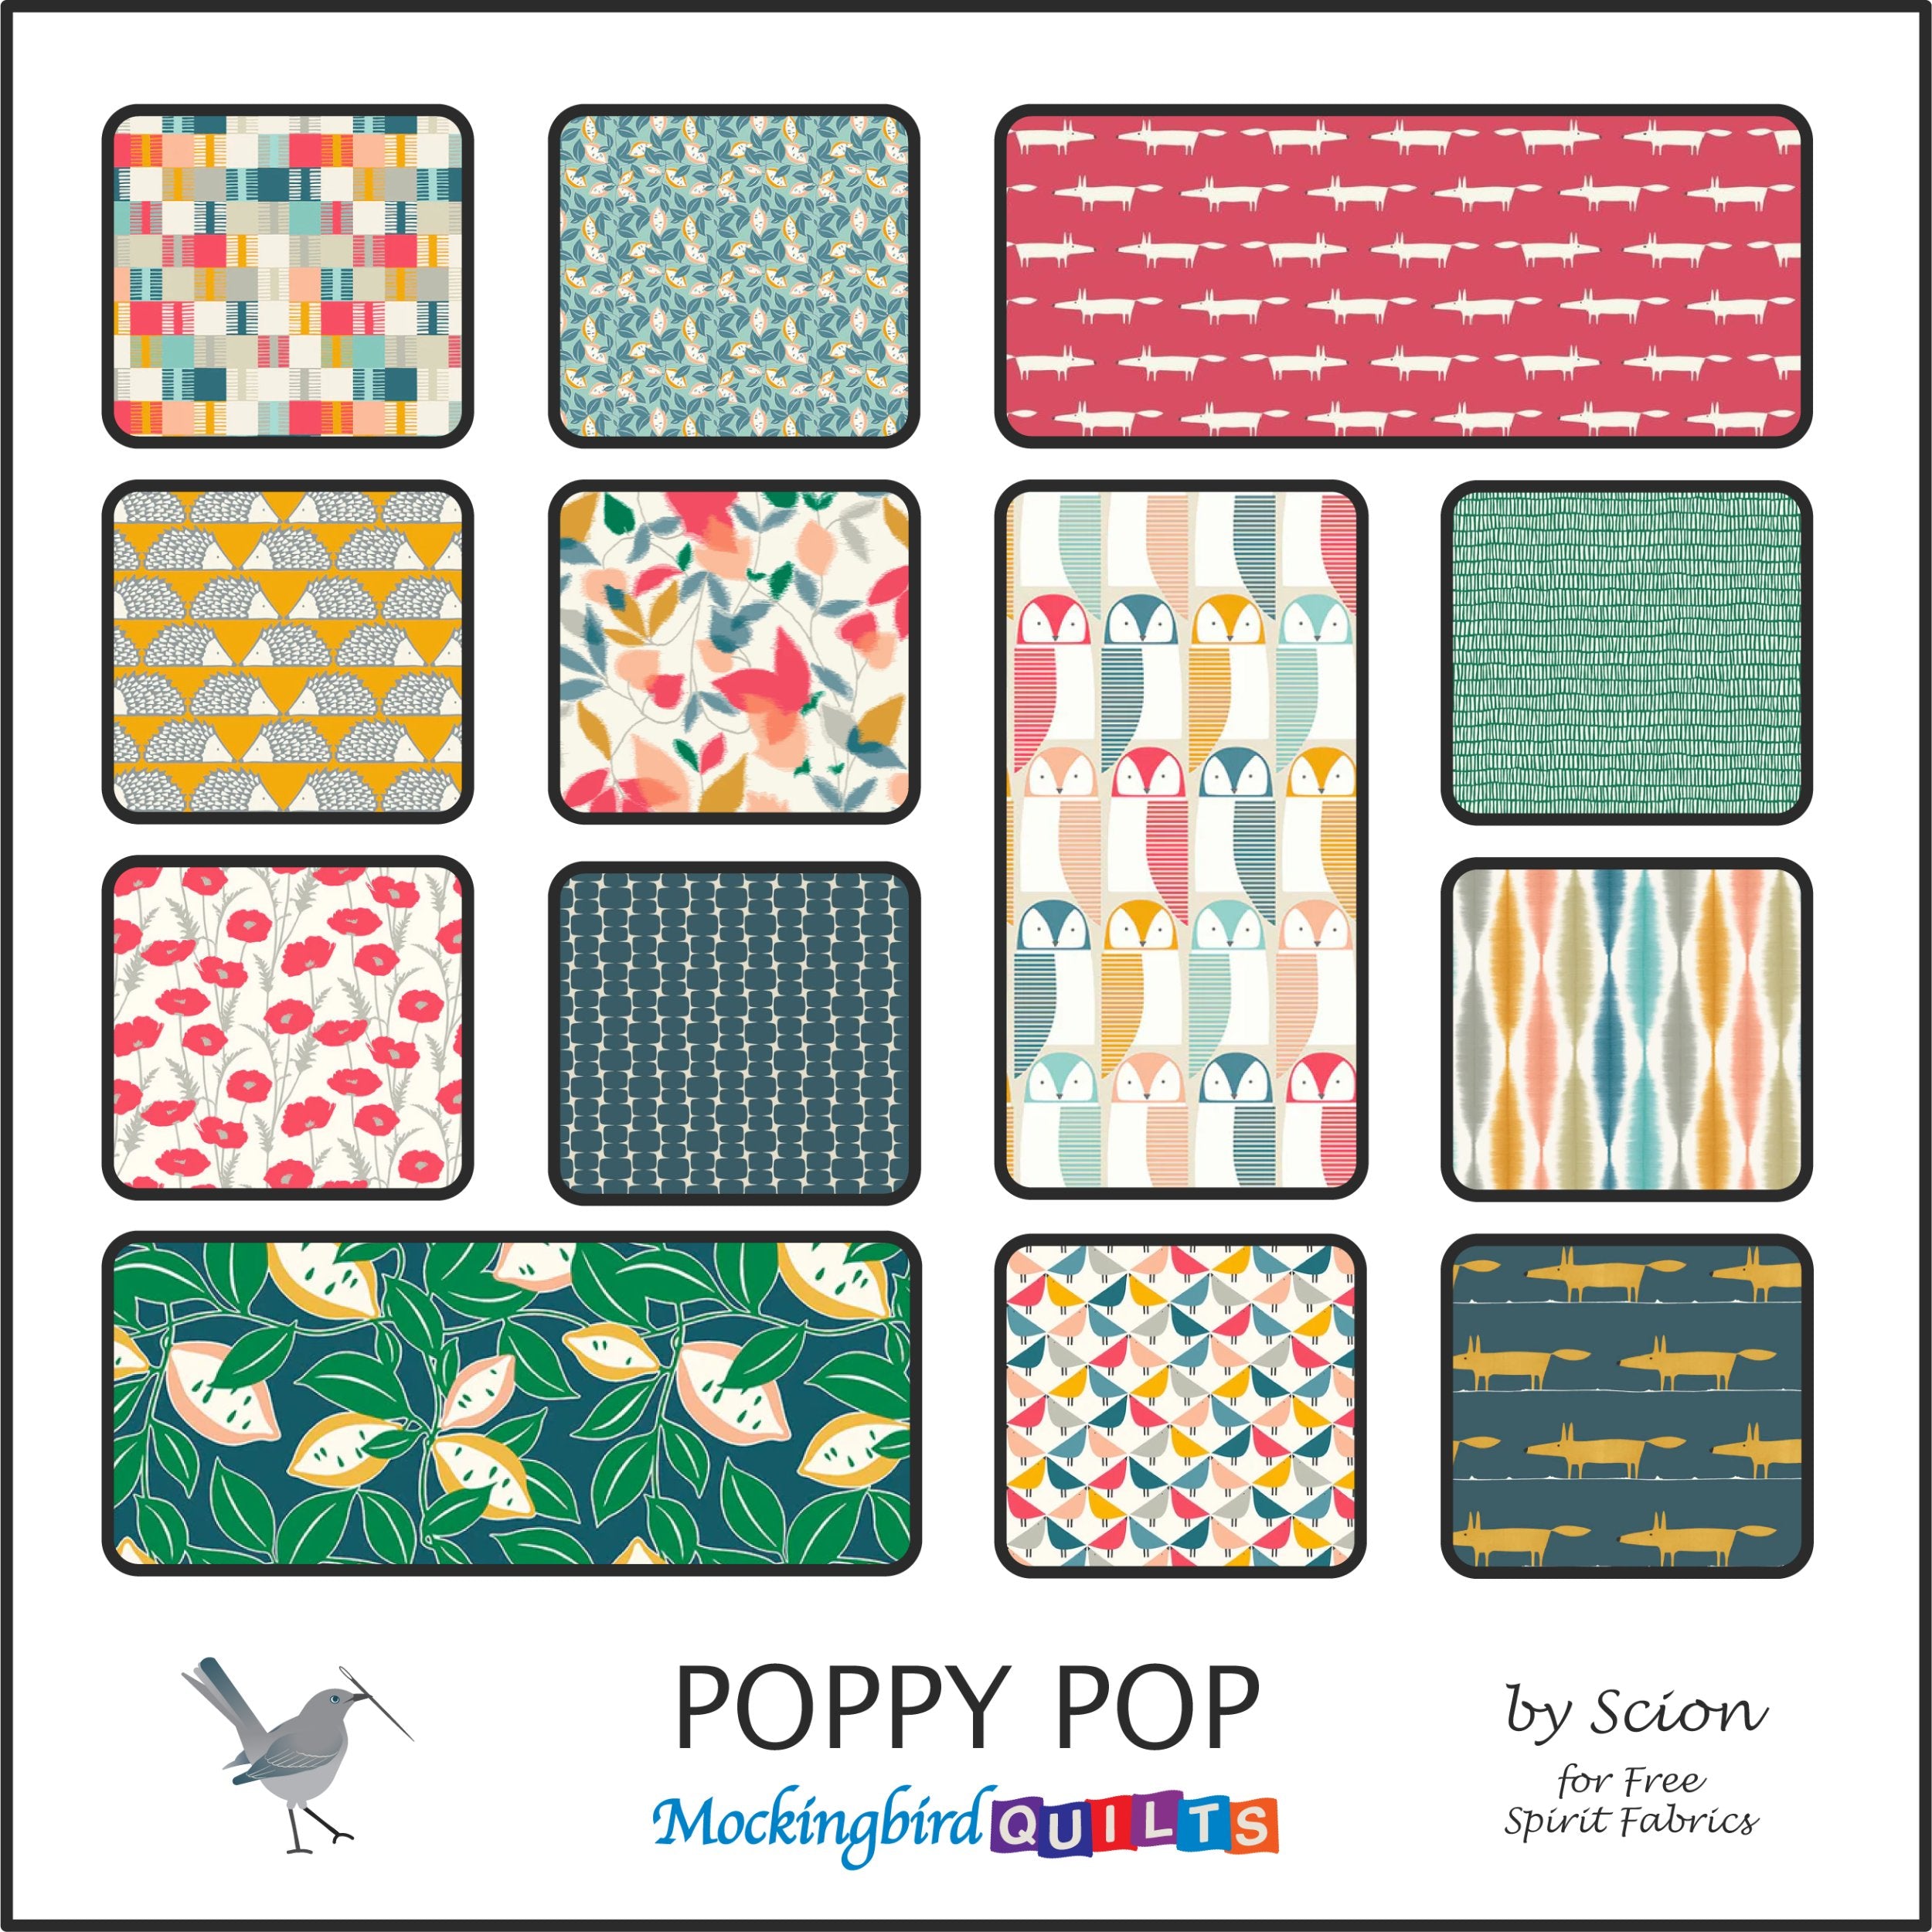 This image shows thirteen fabric swatches in the collection “Poppy Pop” by Scion for FreeSpirit Fabrics. This cheerful fabric line includes a retro-inspired color scheme of teals, corals, and mustards combined with graphic and character prints.